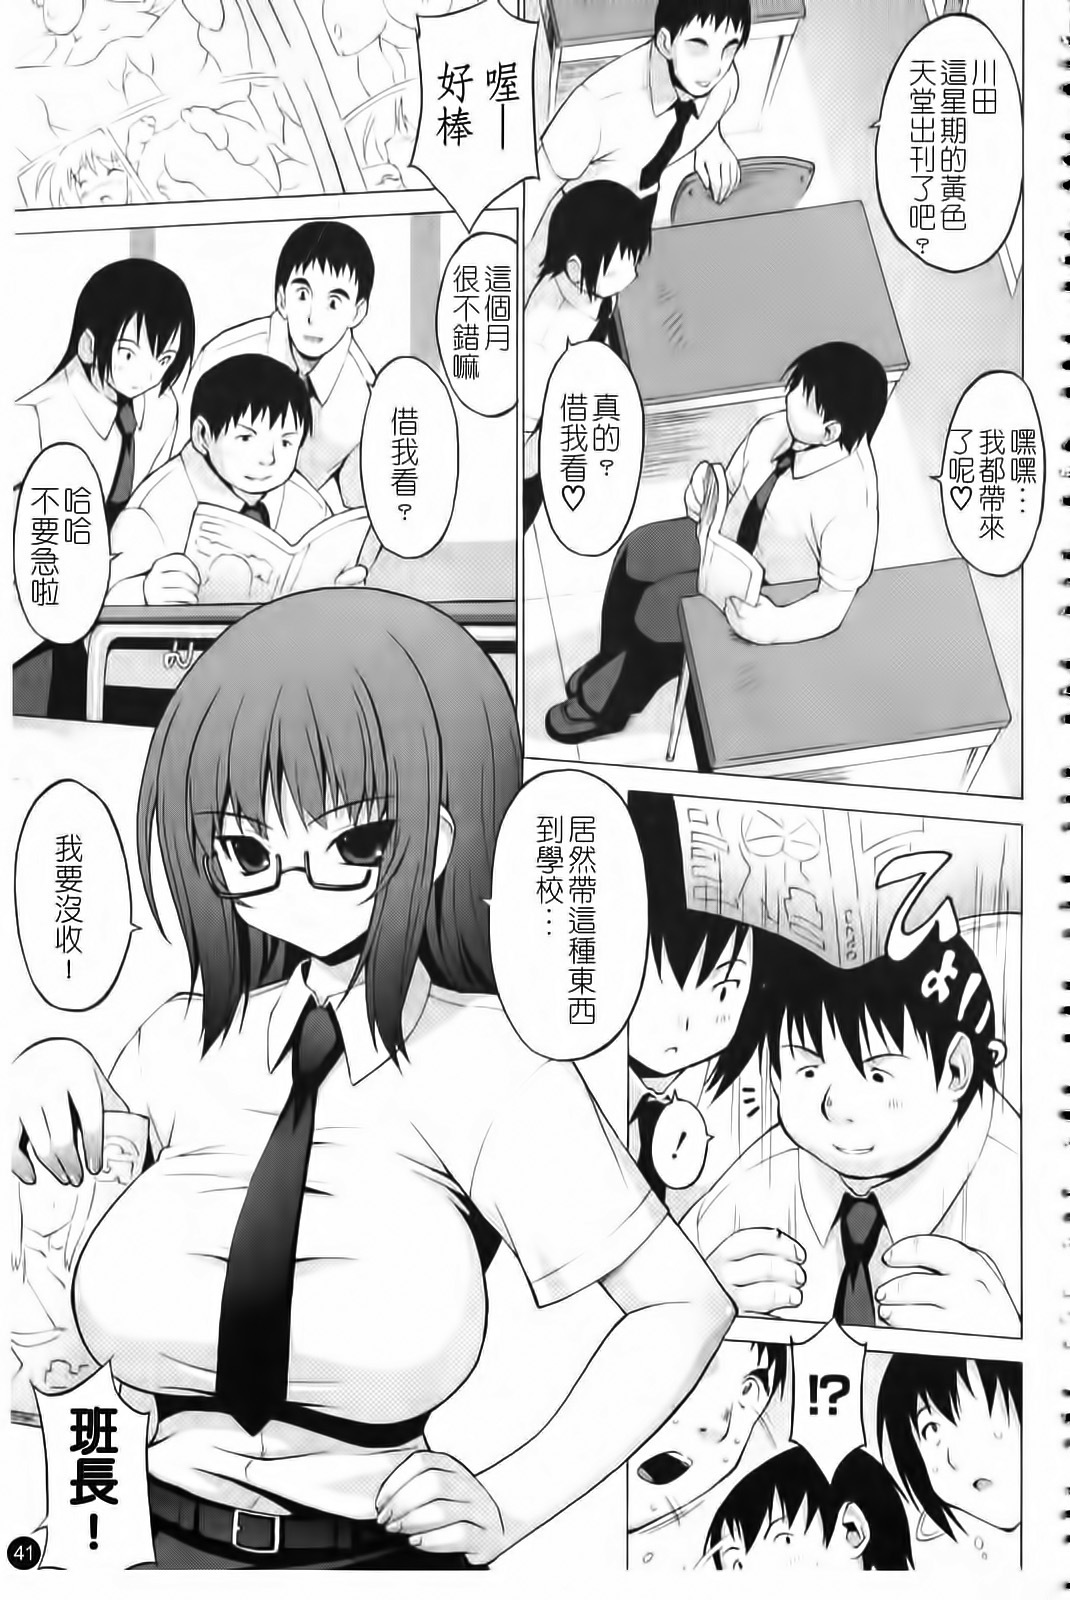 [Onomeshin] Oppai Party [Chinese] page 42 full